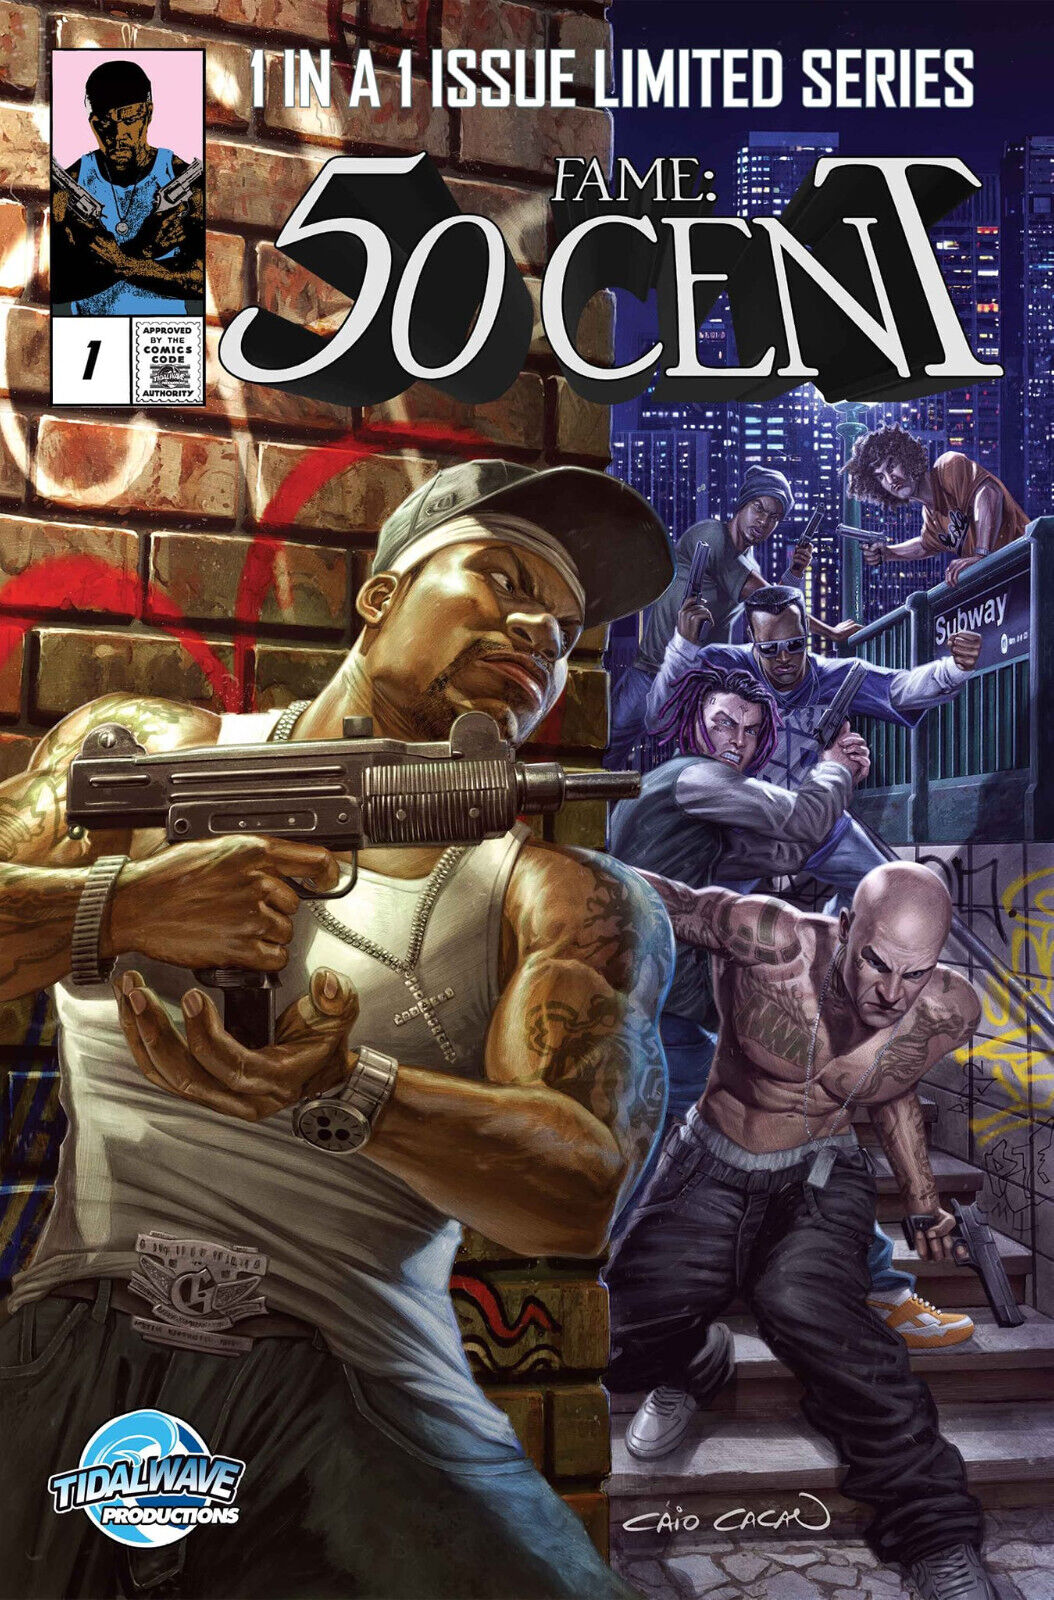 FAME: 50 CENT #1 (CAIO CACAU PUNISHER HOMAGE) COMIC BOOK ~ TIDAL WAVE